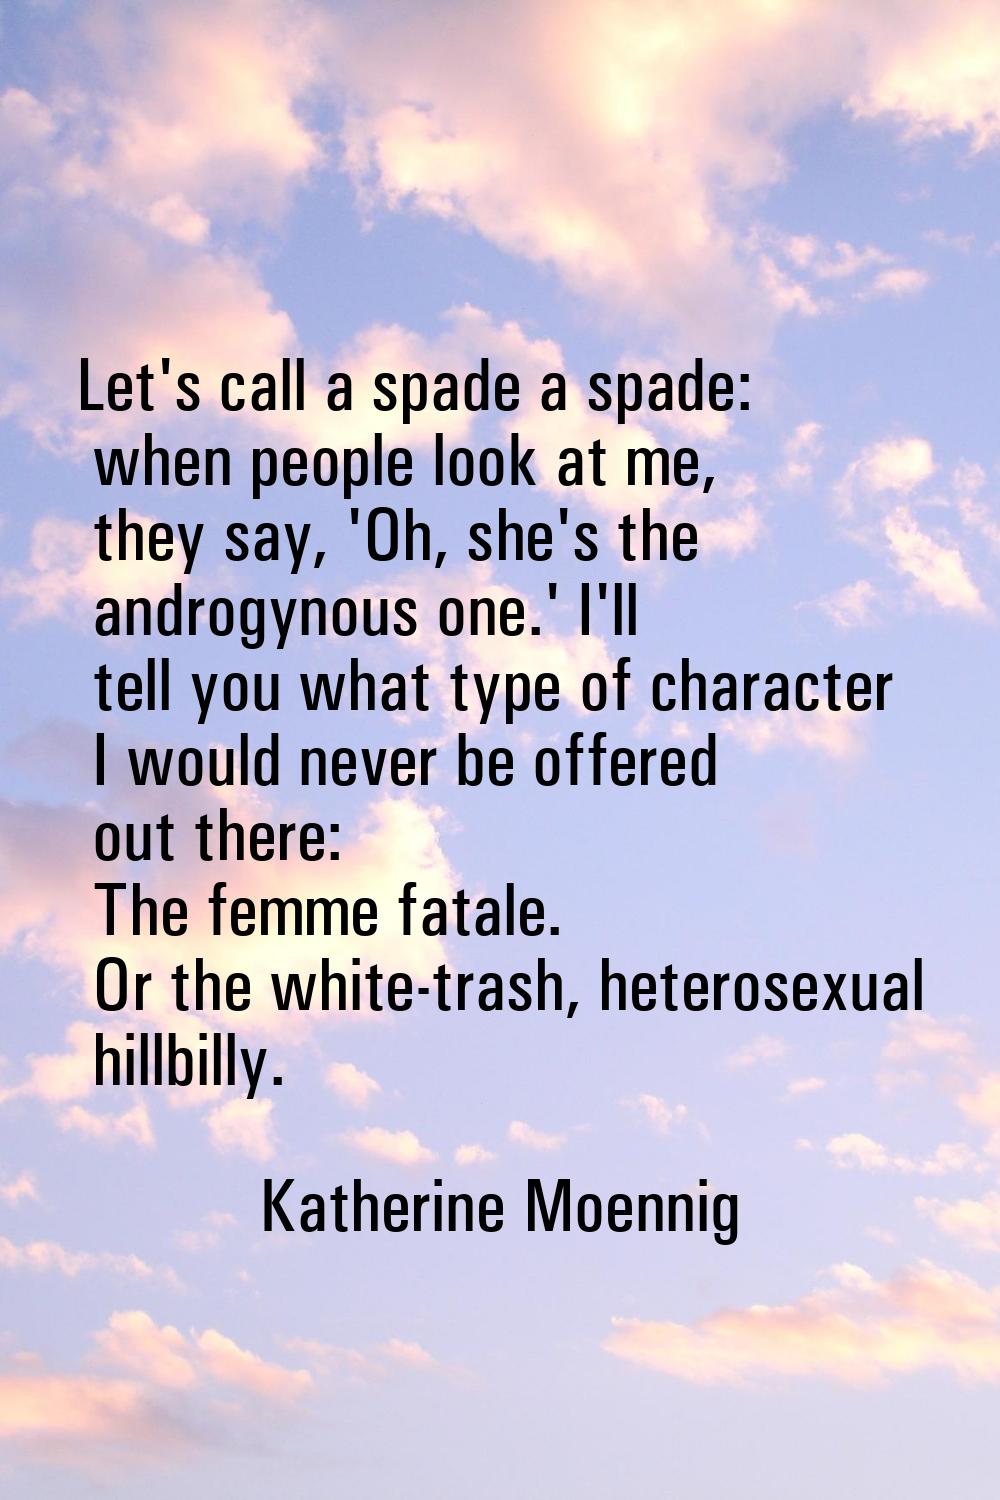 Let's call a spade a spade: when people look at me, they say, 'Oh, she's the androgynous one.' I'll